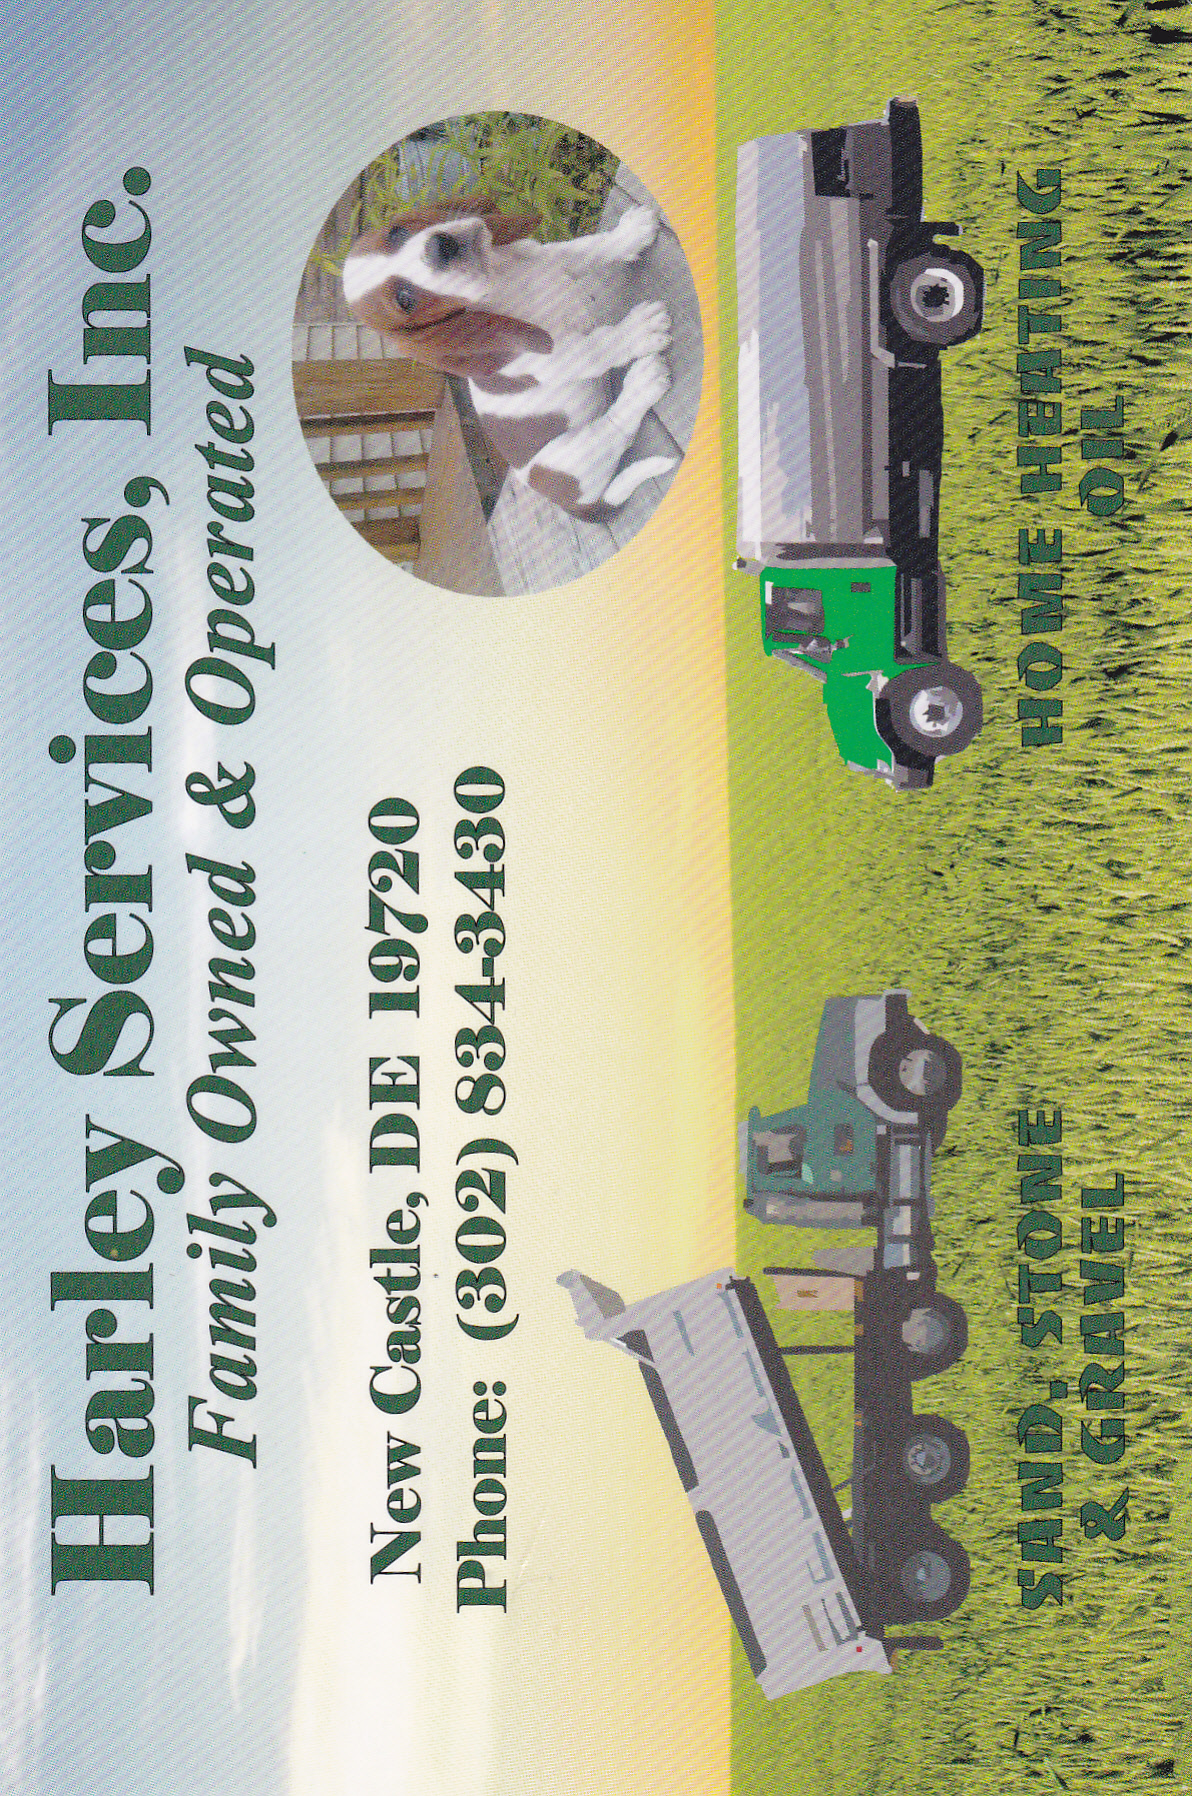 Harley Services, Inc. Heating Oil